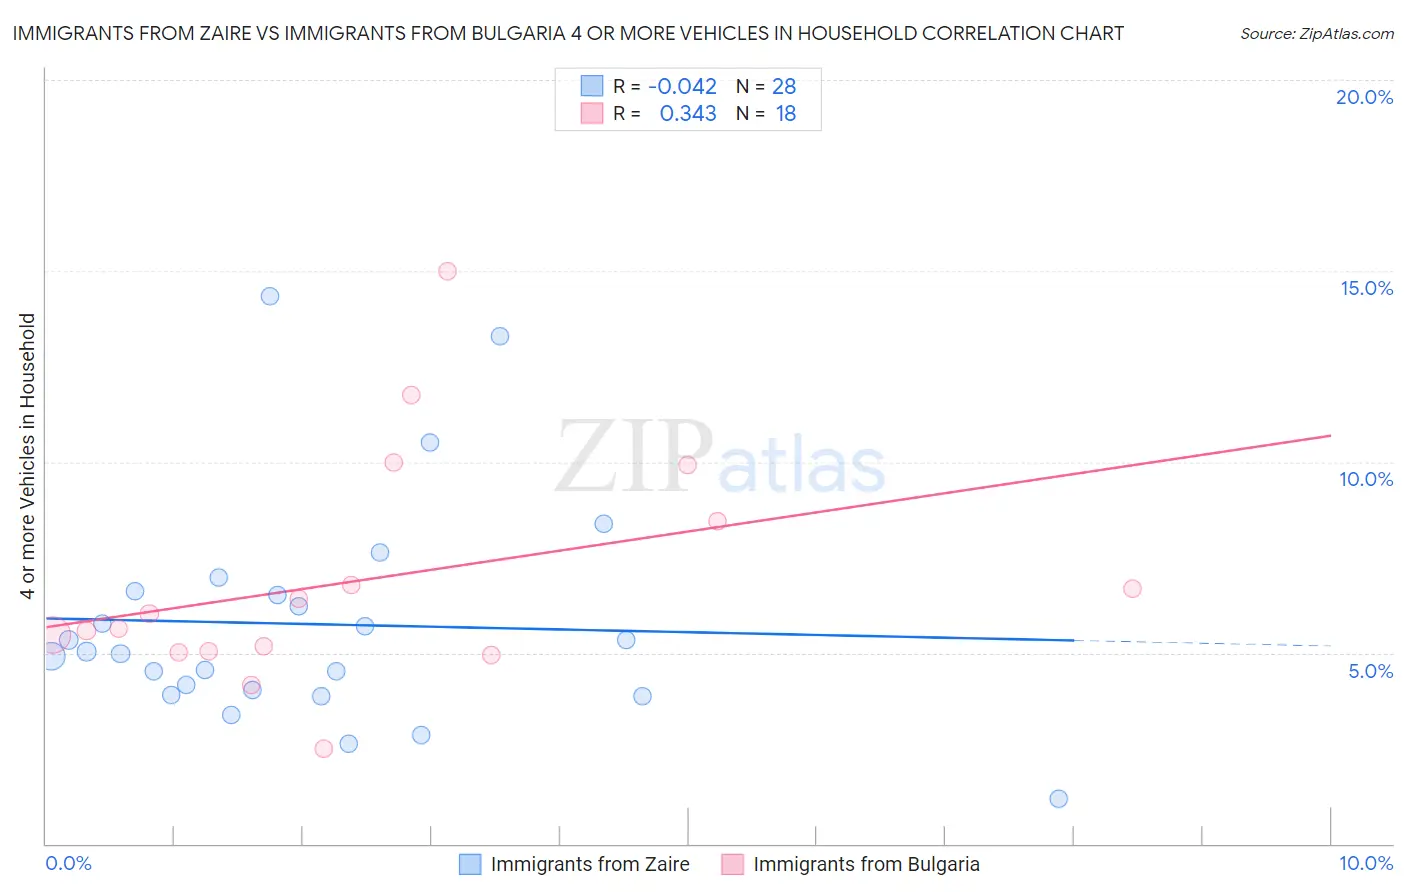 Immigrants from Zaire vs Immigrants from Bulgaria 4 or more Vehicles in Household